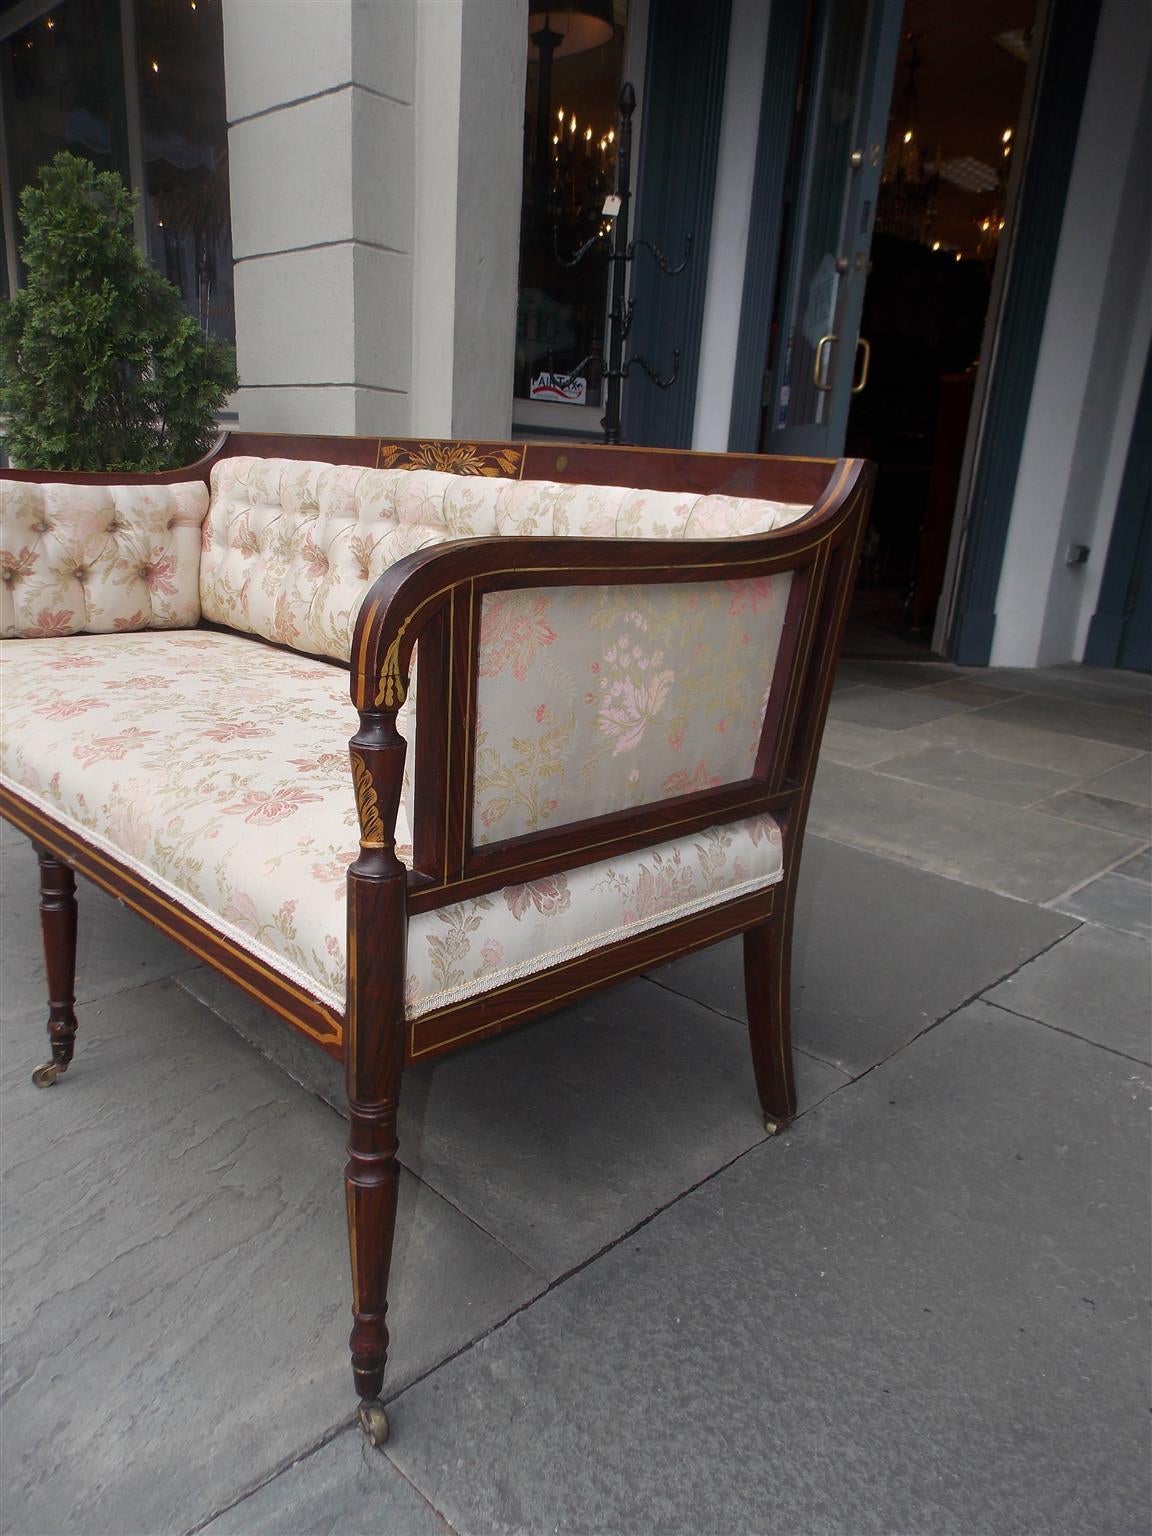 Giltwood English Regency Stenciled and Gilt Tufted Upholstered Settee, Circa 1780 For Sale